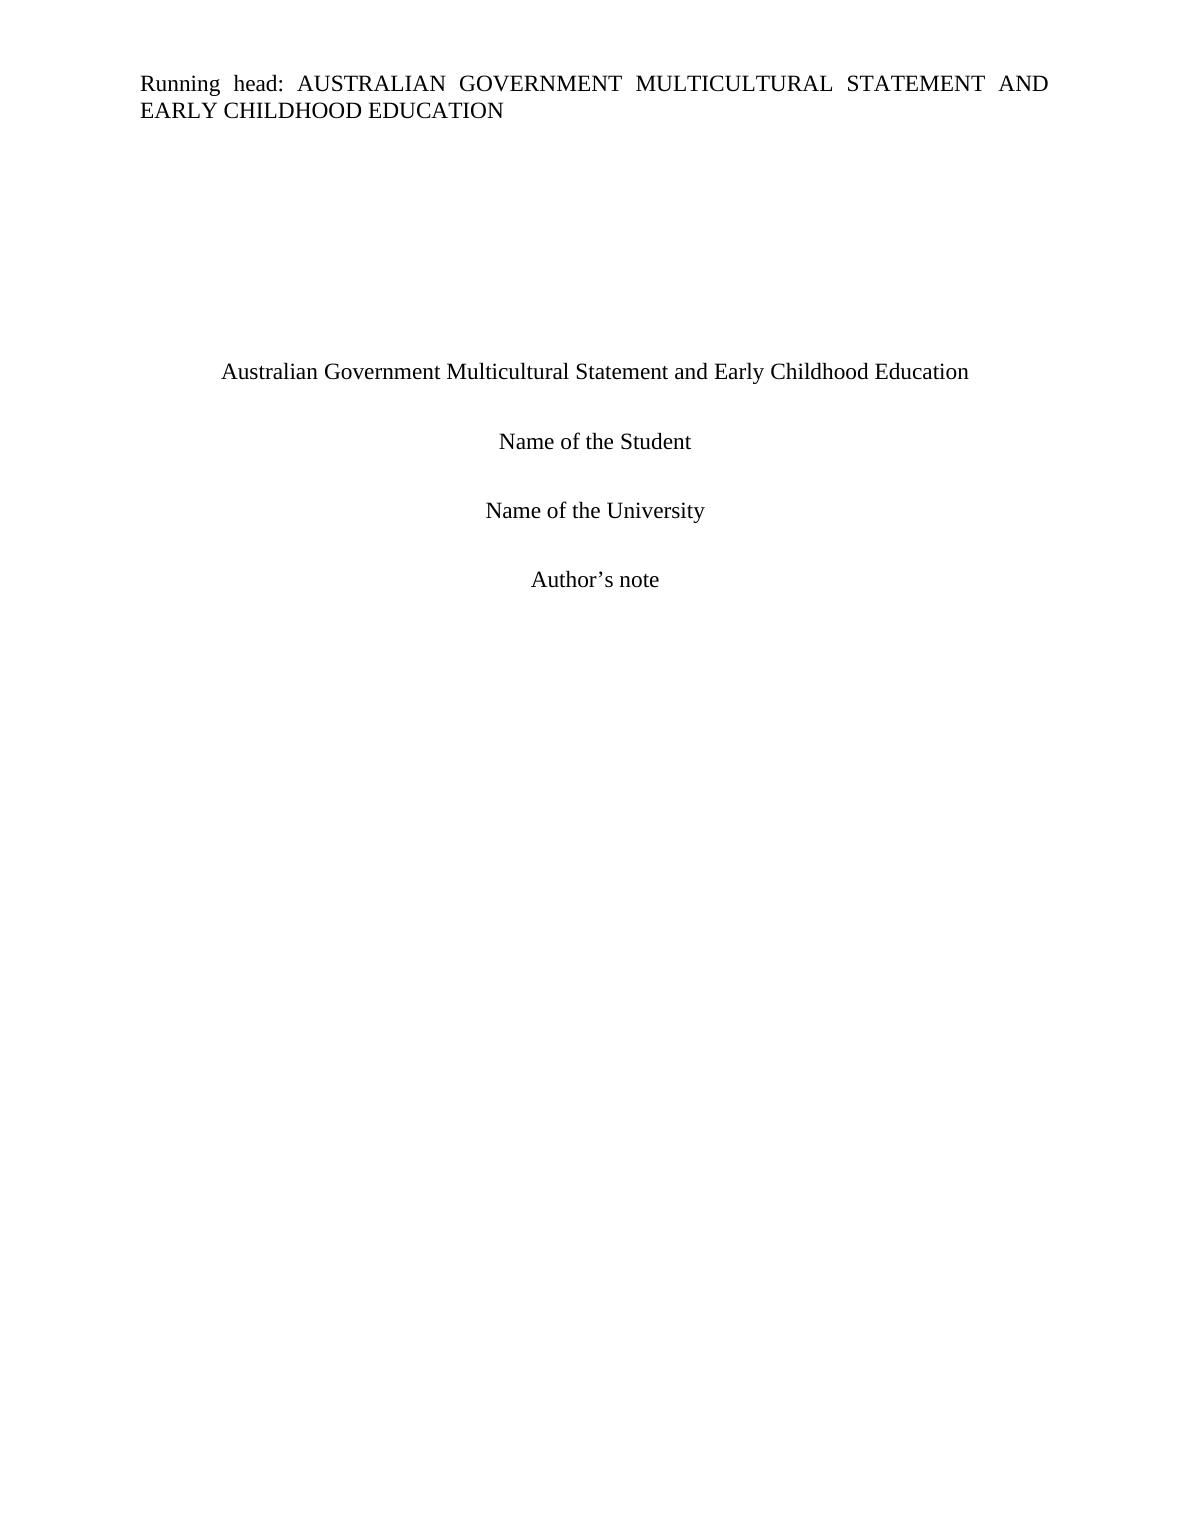 Australian Government Multicultural Statement and Early Childhood Education_1